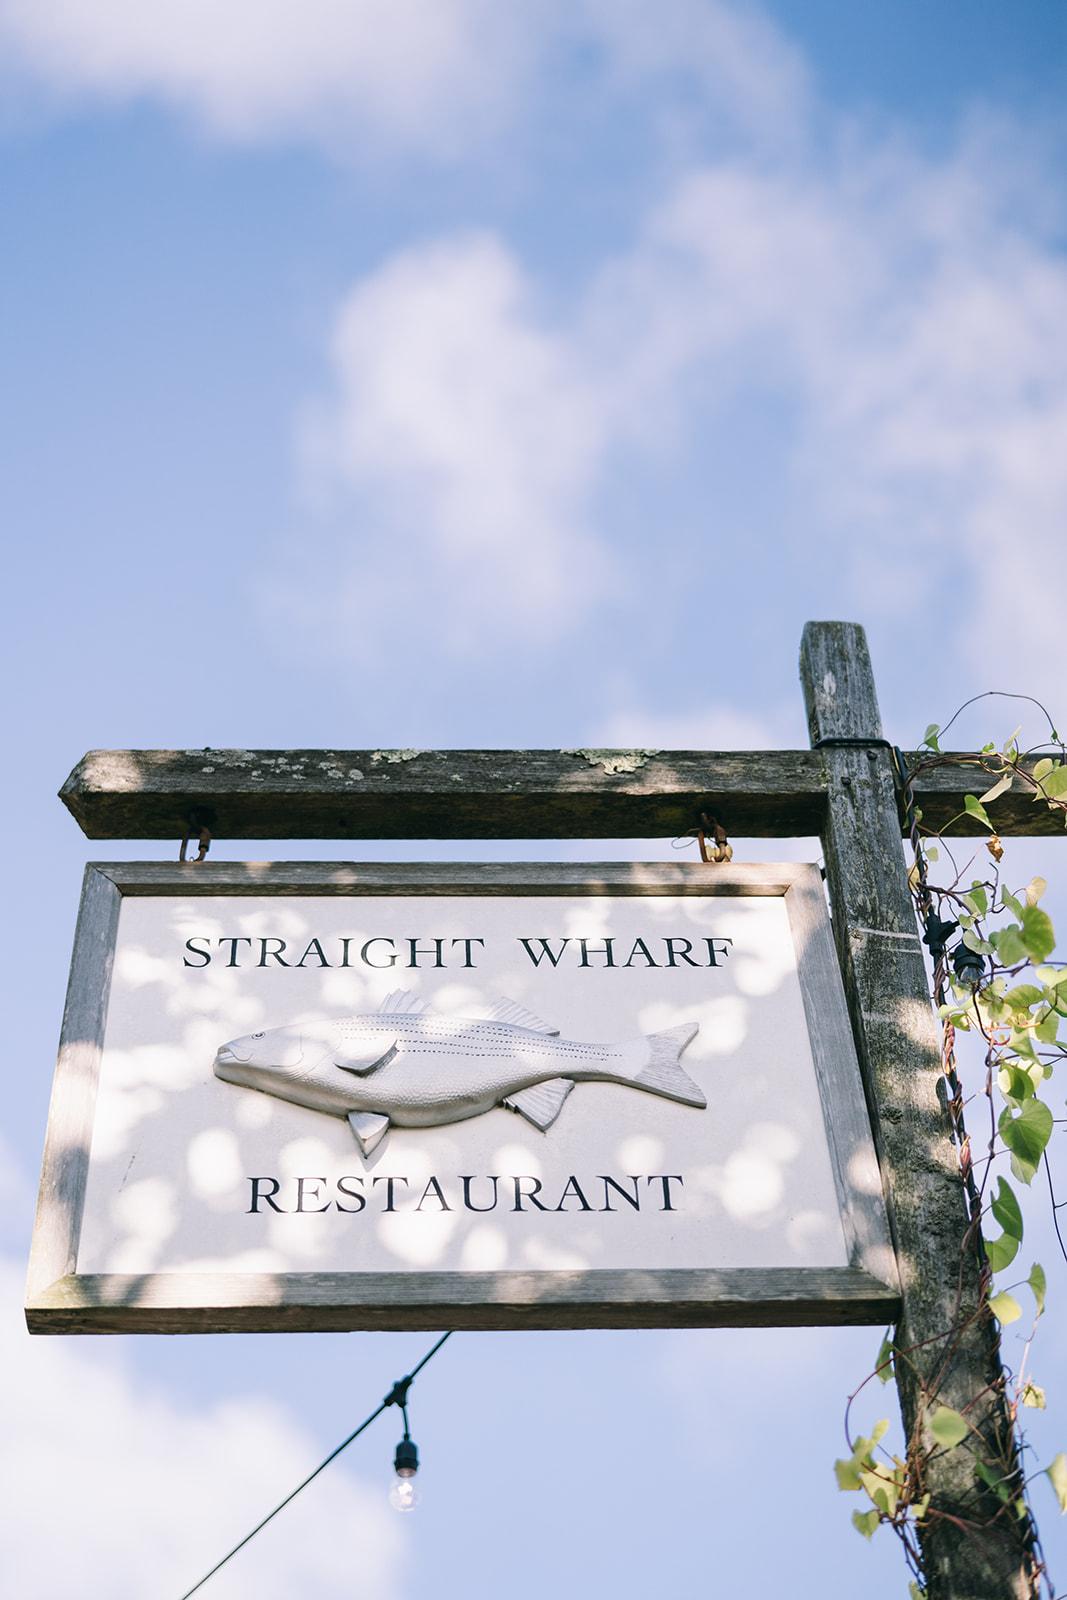 Sign against a blue sky with a few clouds that says 'Straight Whale Restaurant' in Nantucket